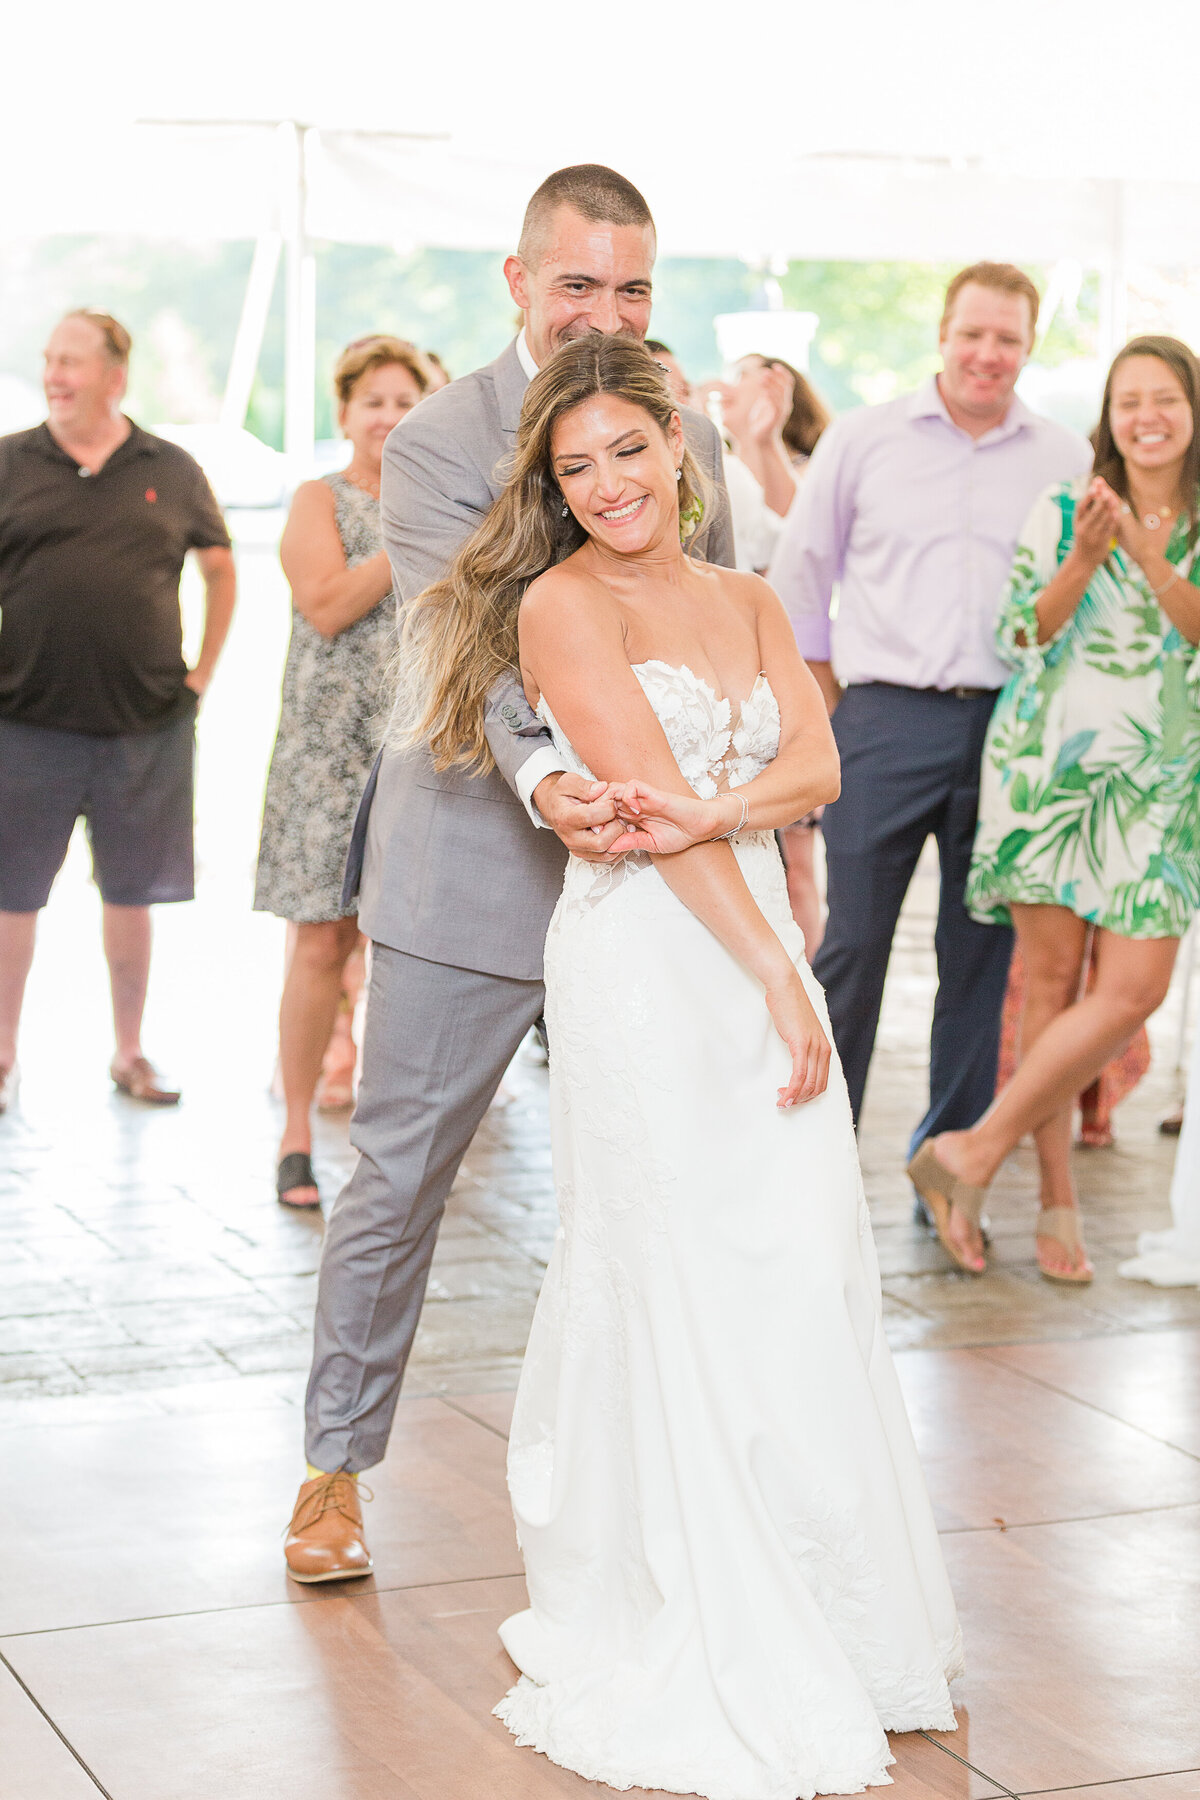 Bride and groom are laughing as they share their first dance at their Five Bridge Inn Wedding Reception. Guests are smiling and laughing in the background. Captured by best Massachusetts wedding photographer Lia Rose Weddings.